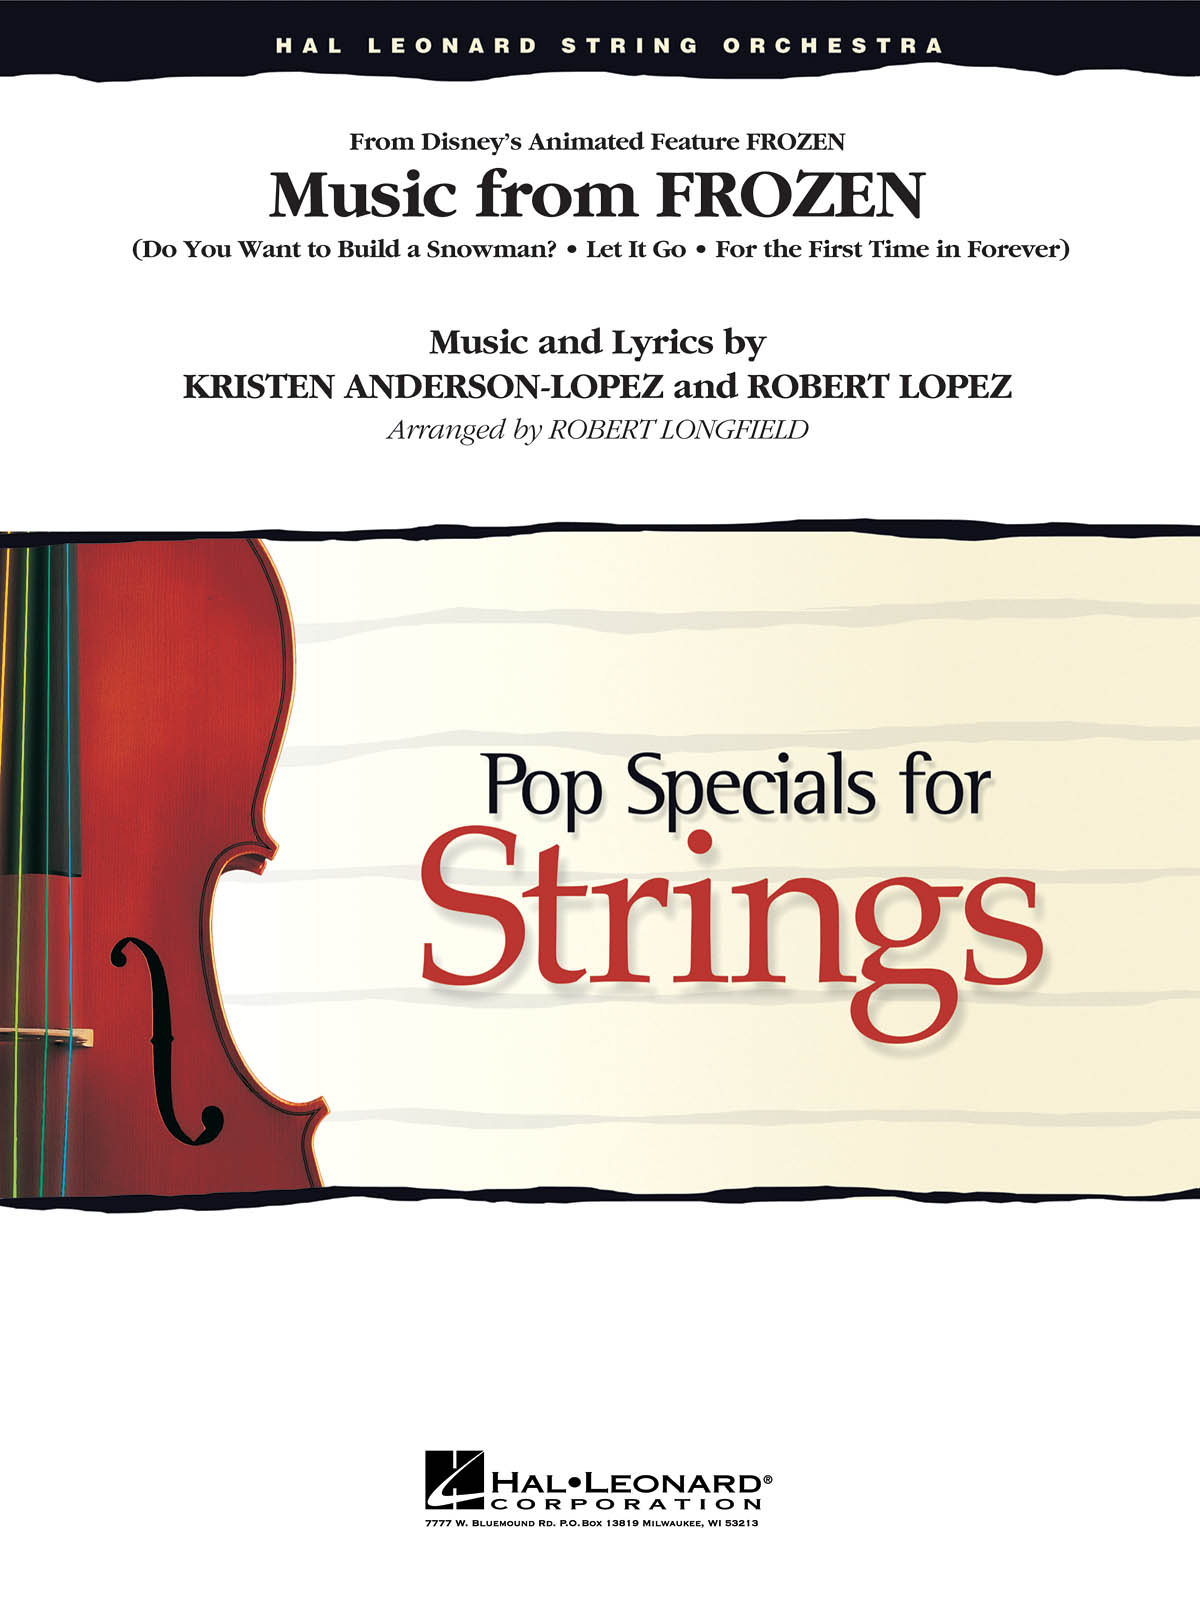 Music from Frozen Pop Specials for Strings